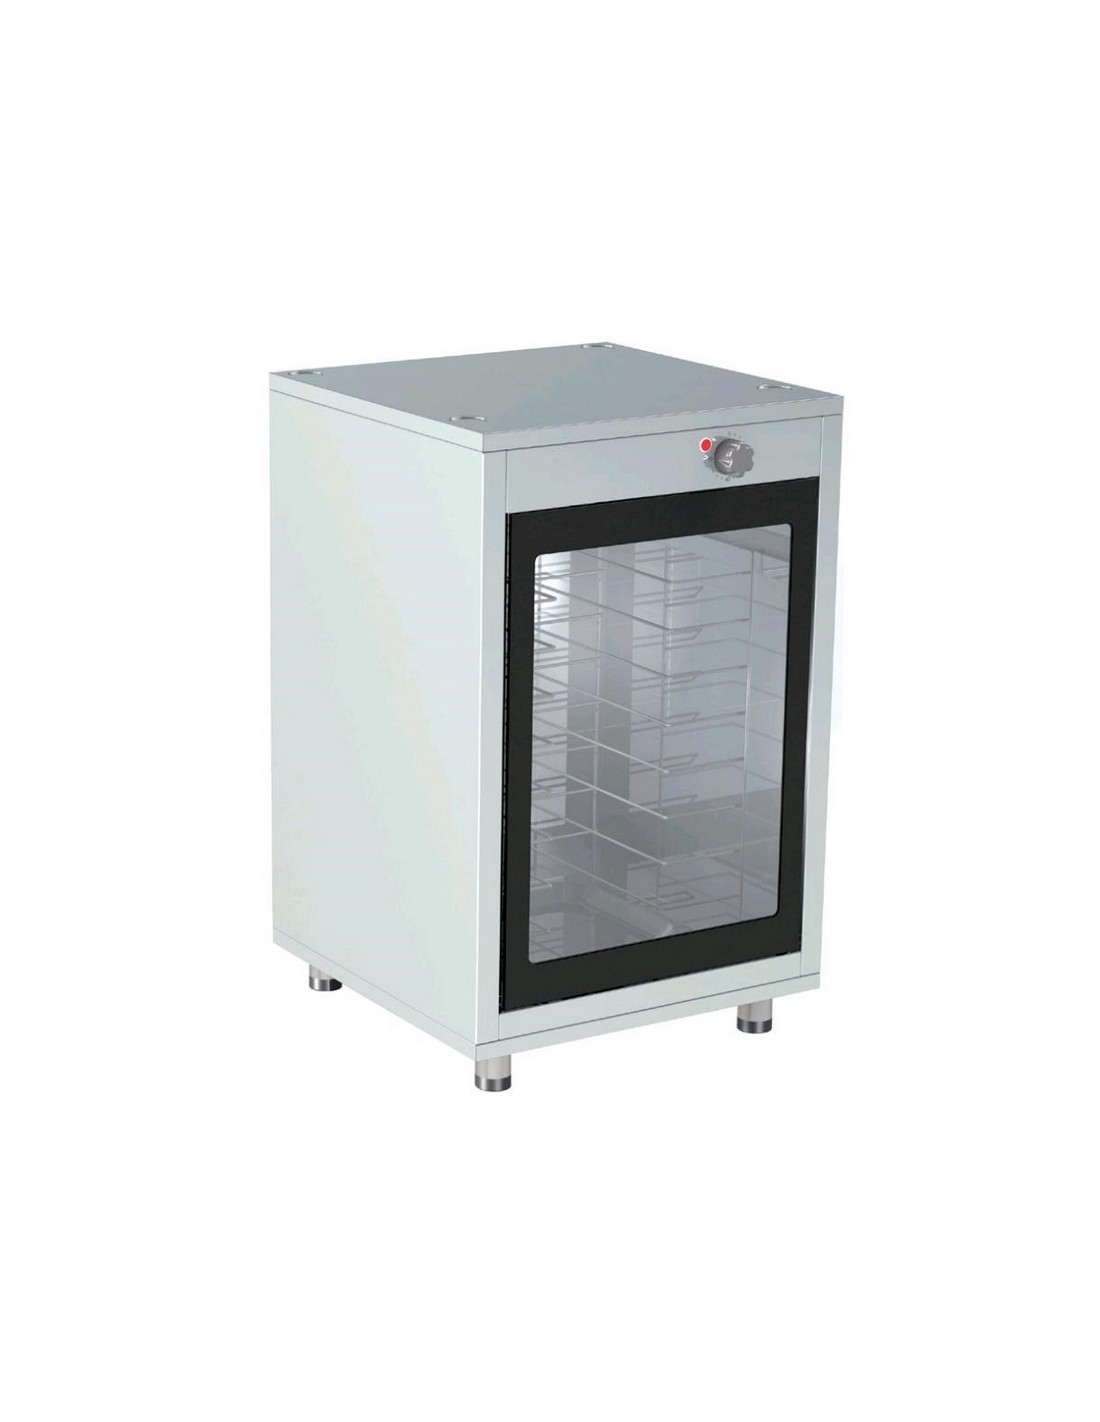 Prover cabinet - Capacity 8 trays 46 x 33 cm or GN 2/3 ( 35.4 x 32.5 ) - cm 63.7 x 60 x 92.8 h